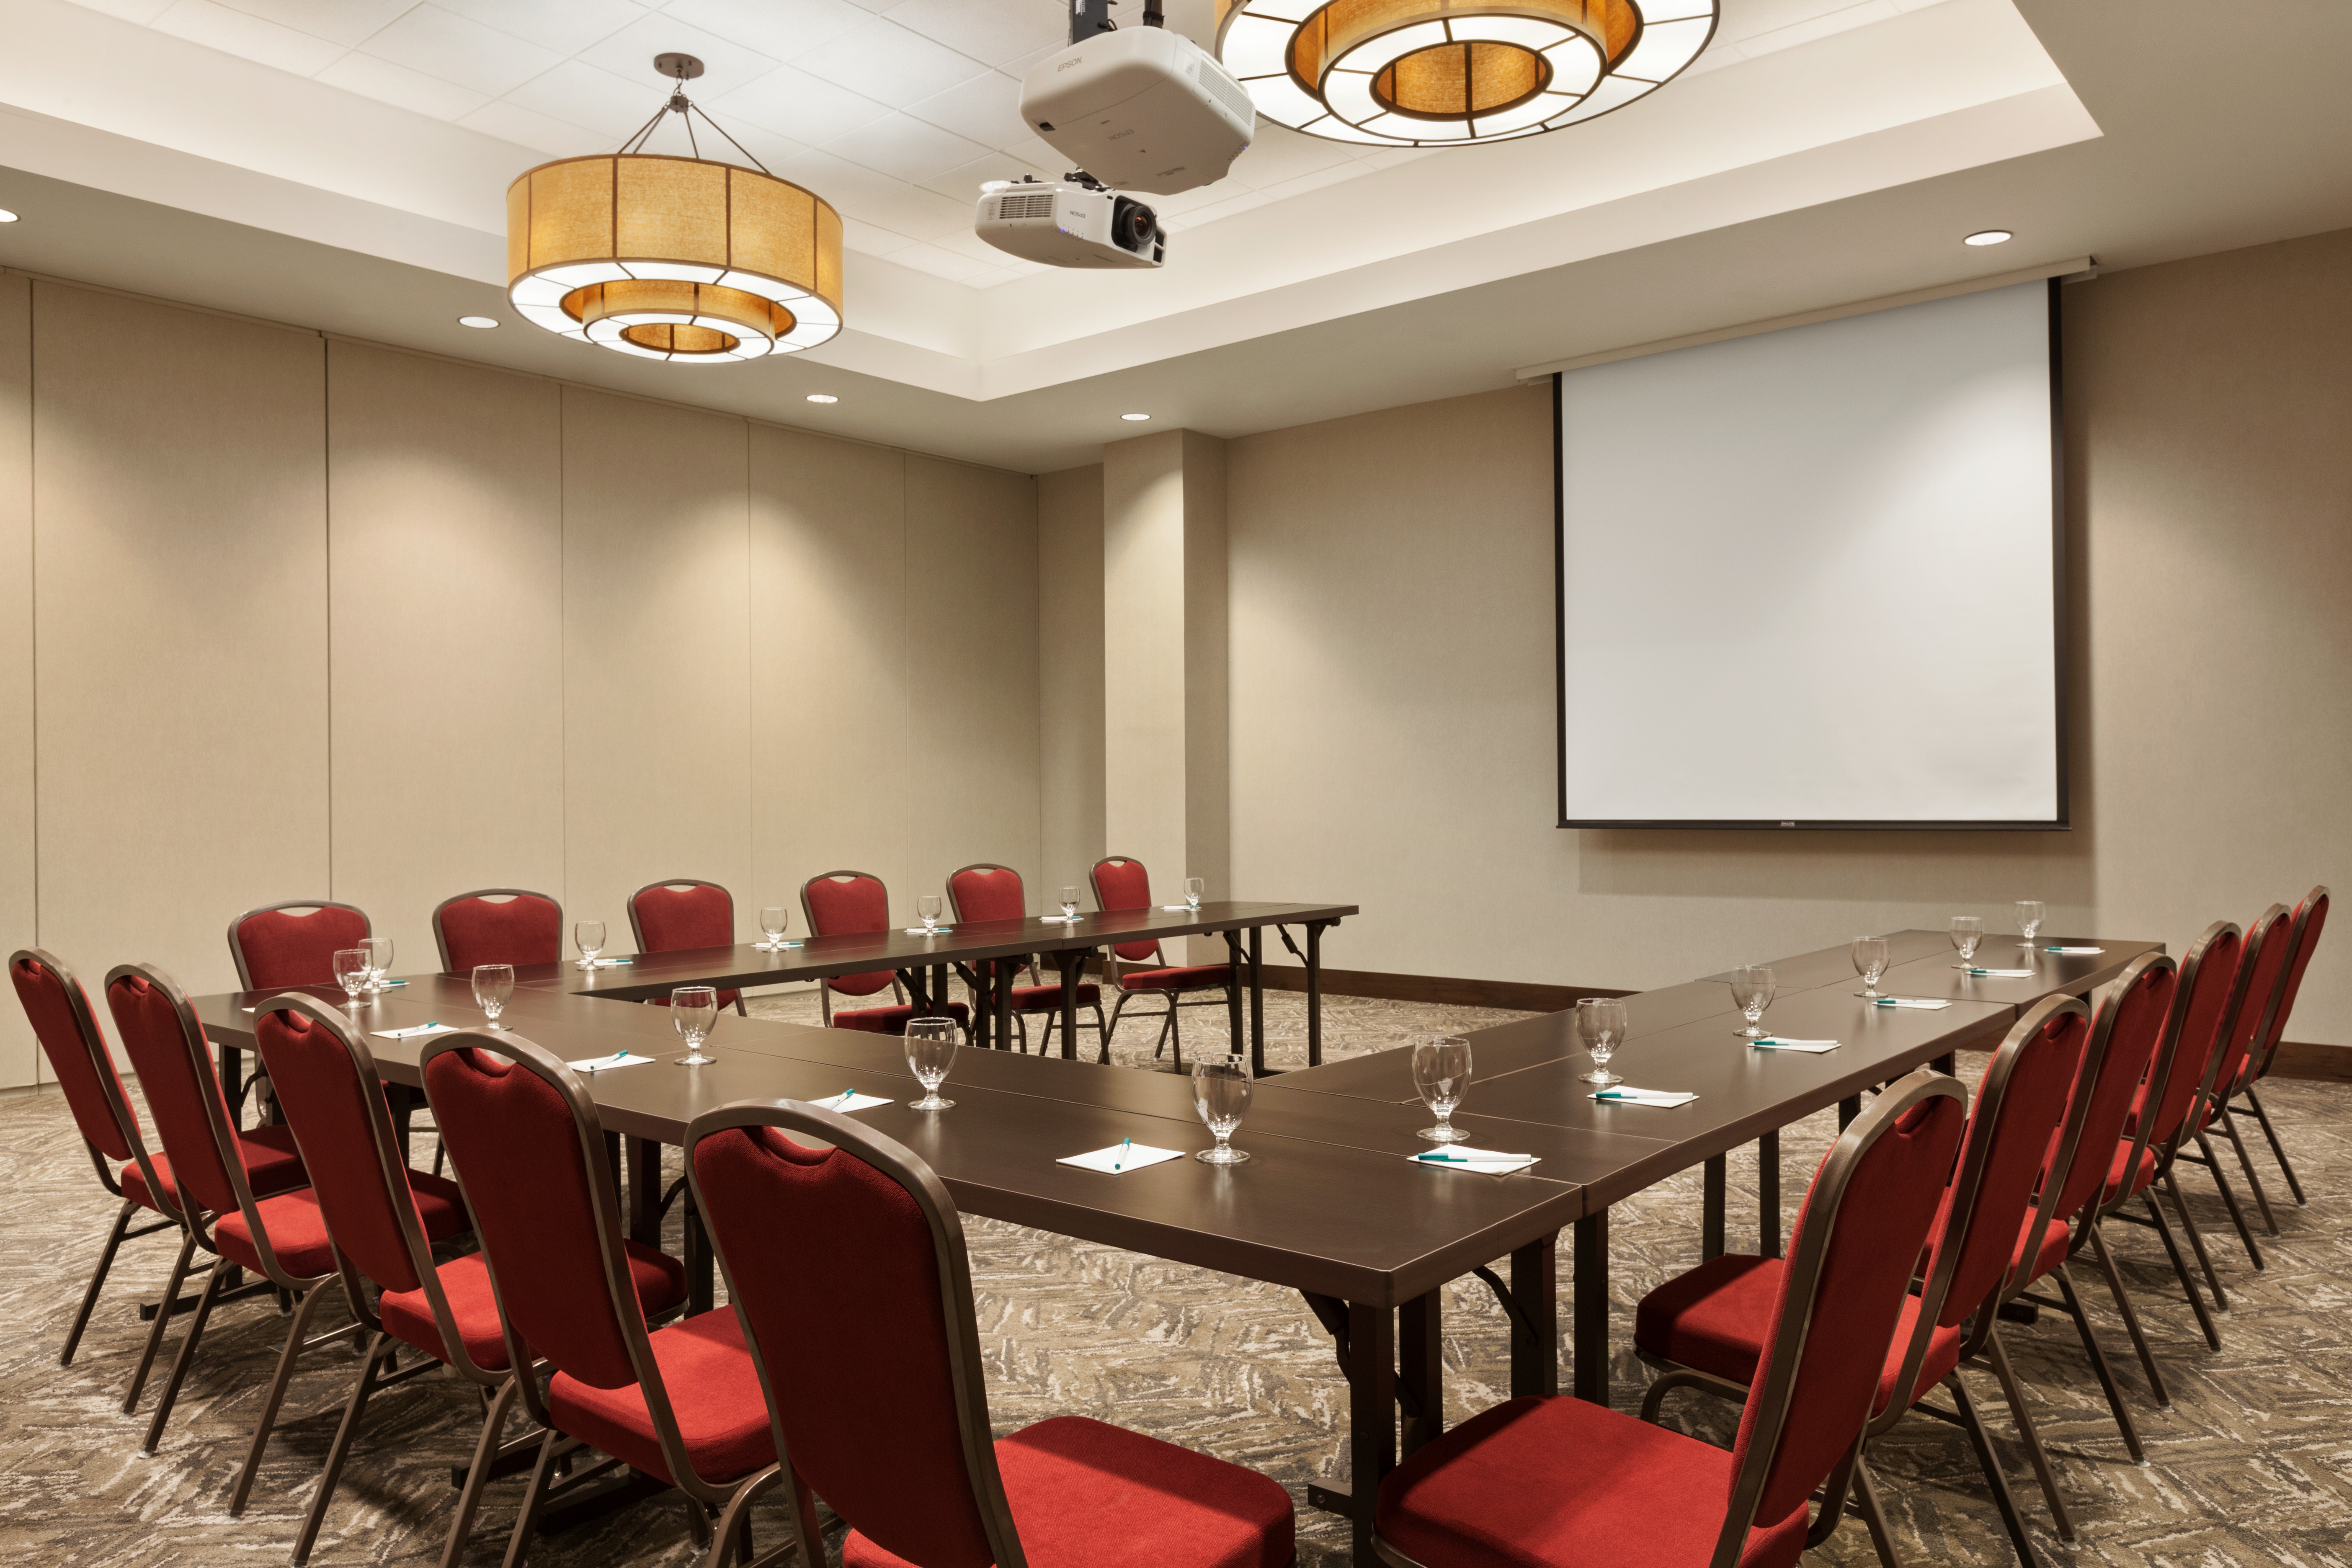 Meeting Room U-Shaped Table Layout with Projector Screen